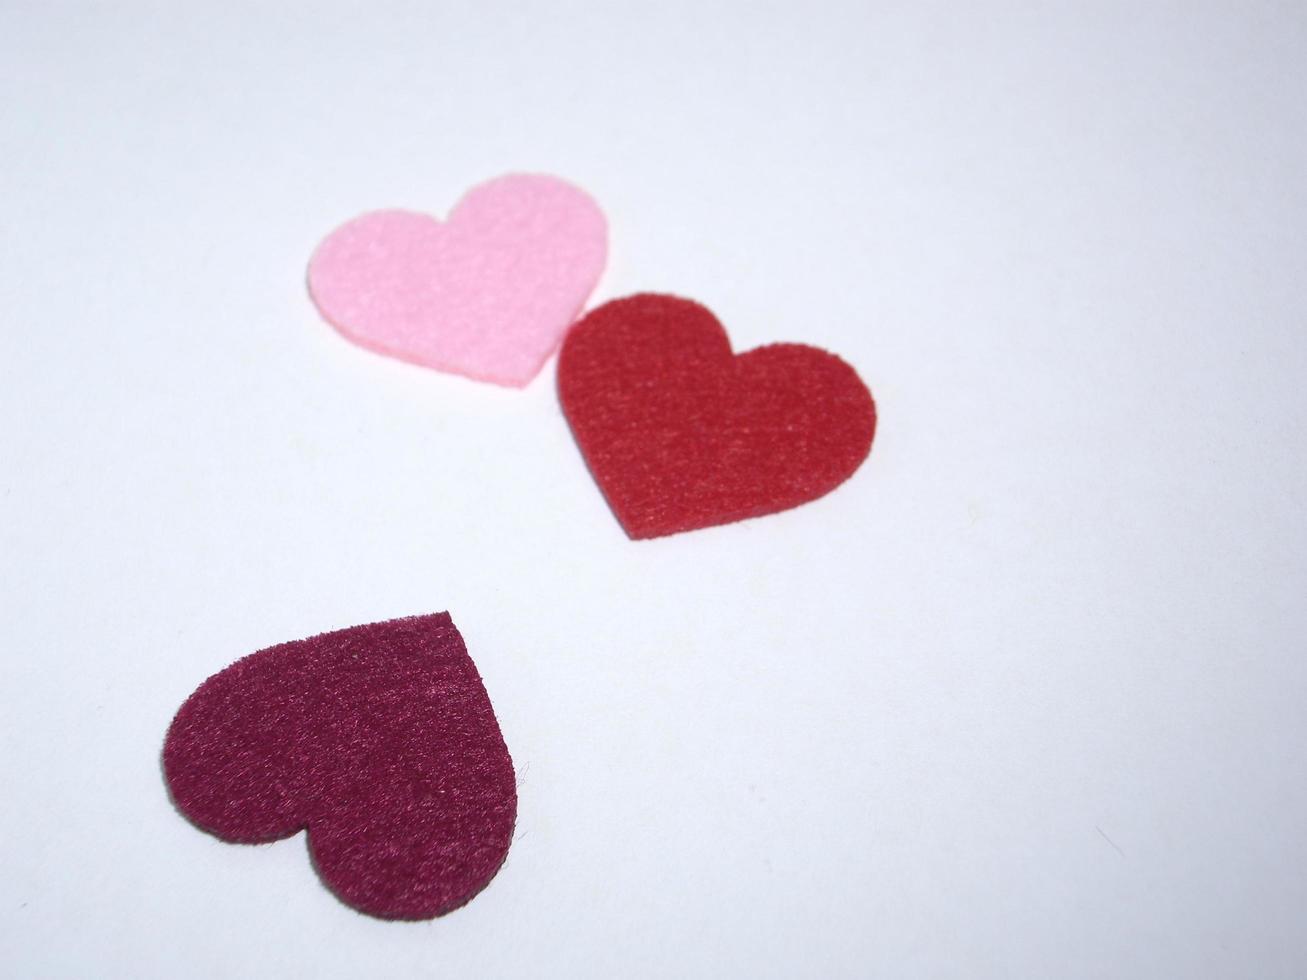 Multicolored heart shapes on a light background photo